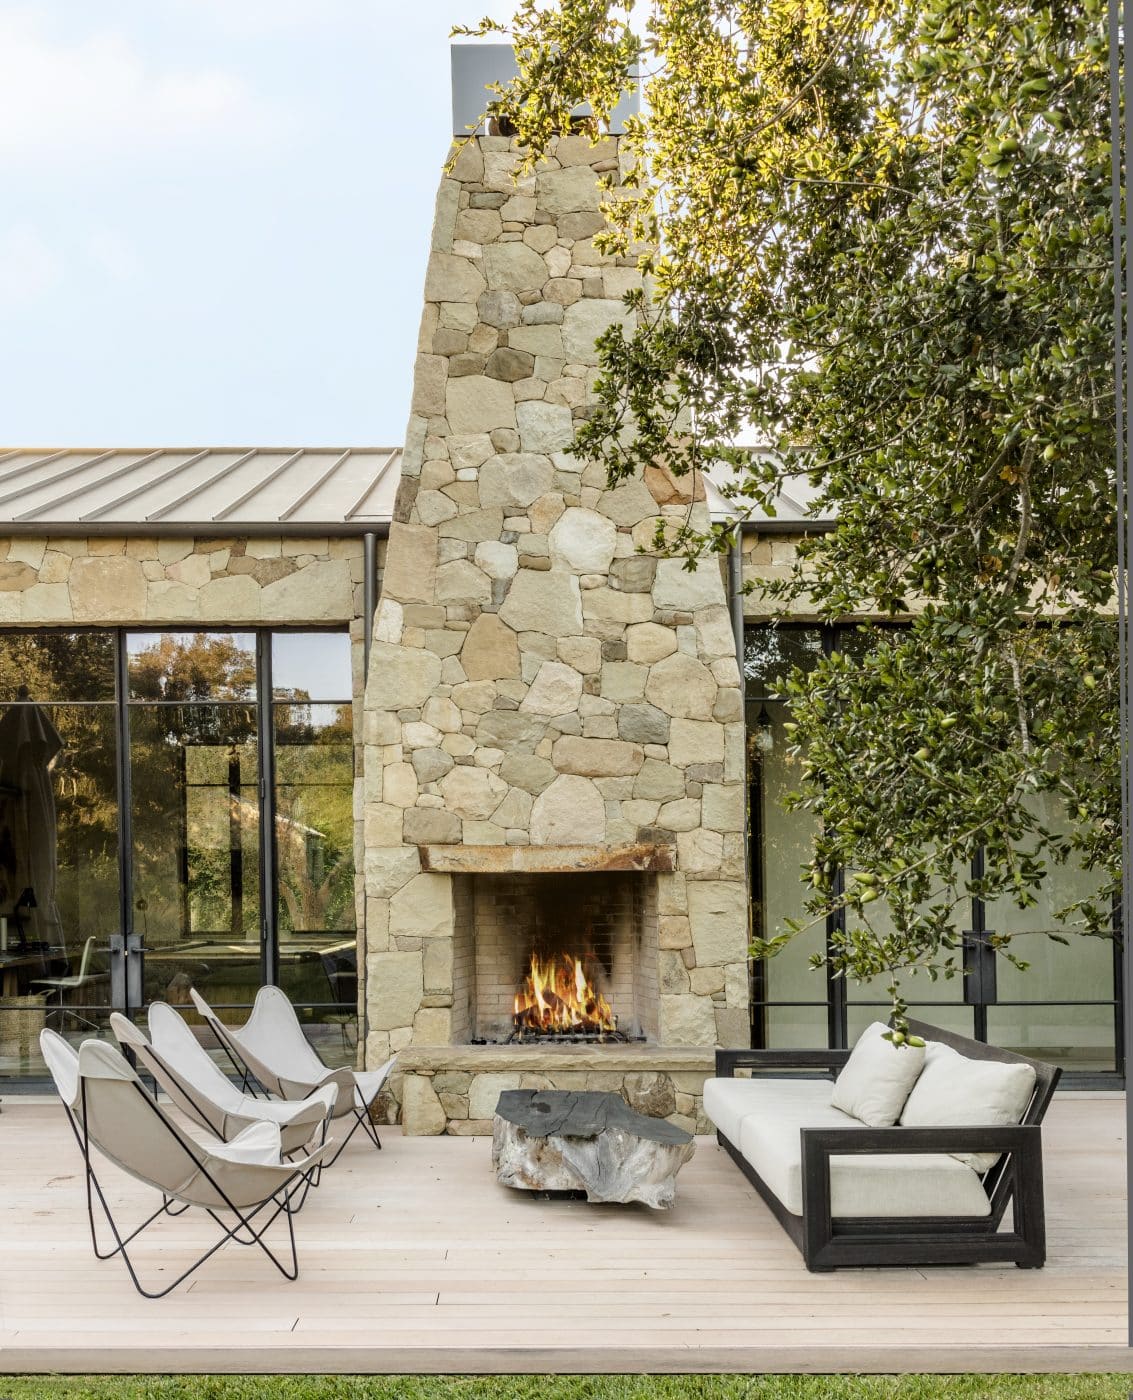 Outdoor living area in front of large alfresco fireplace at the home of architect William Hefner from Montecito Style: Paradise on California’s Gold Coast Phaidon Monacelli Press book 